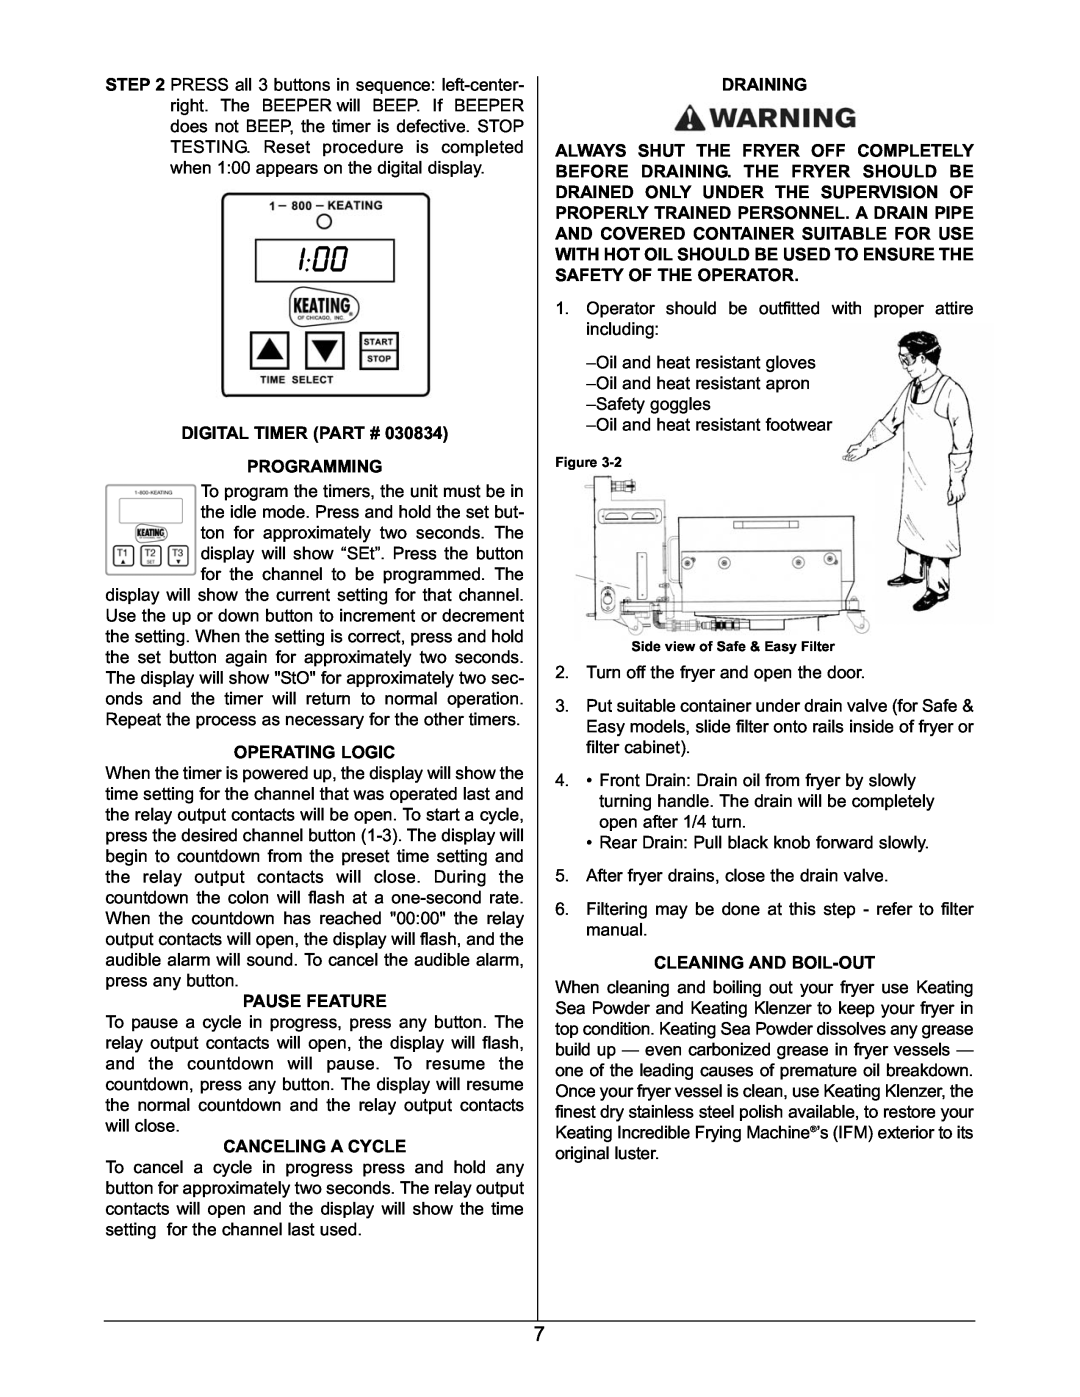 Keating Of Chicago 2006 Digital Timer Part # Programming, Operating Logic, Pause Feature, Canceling A Cycle, Draining 